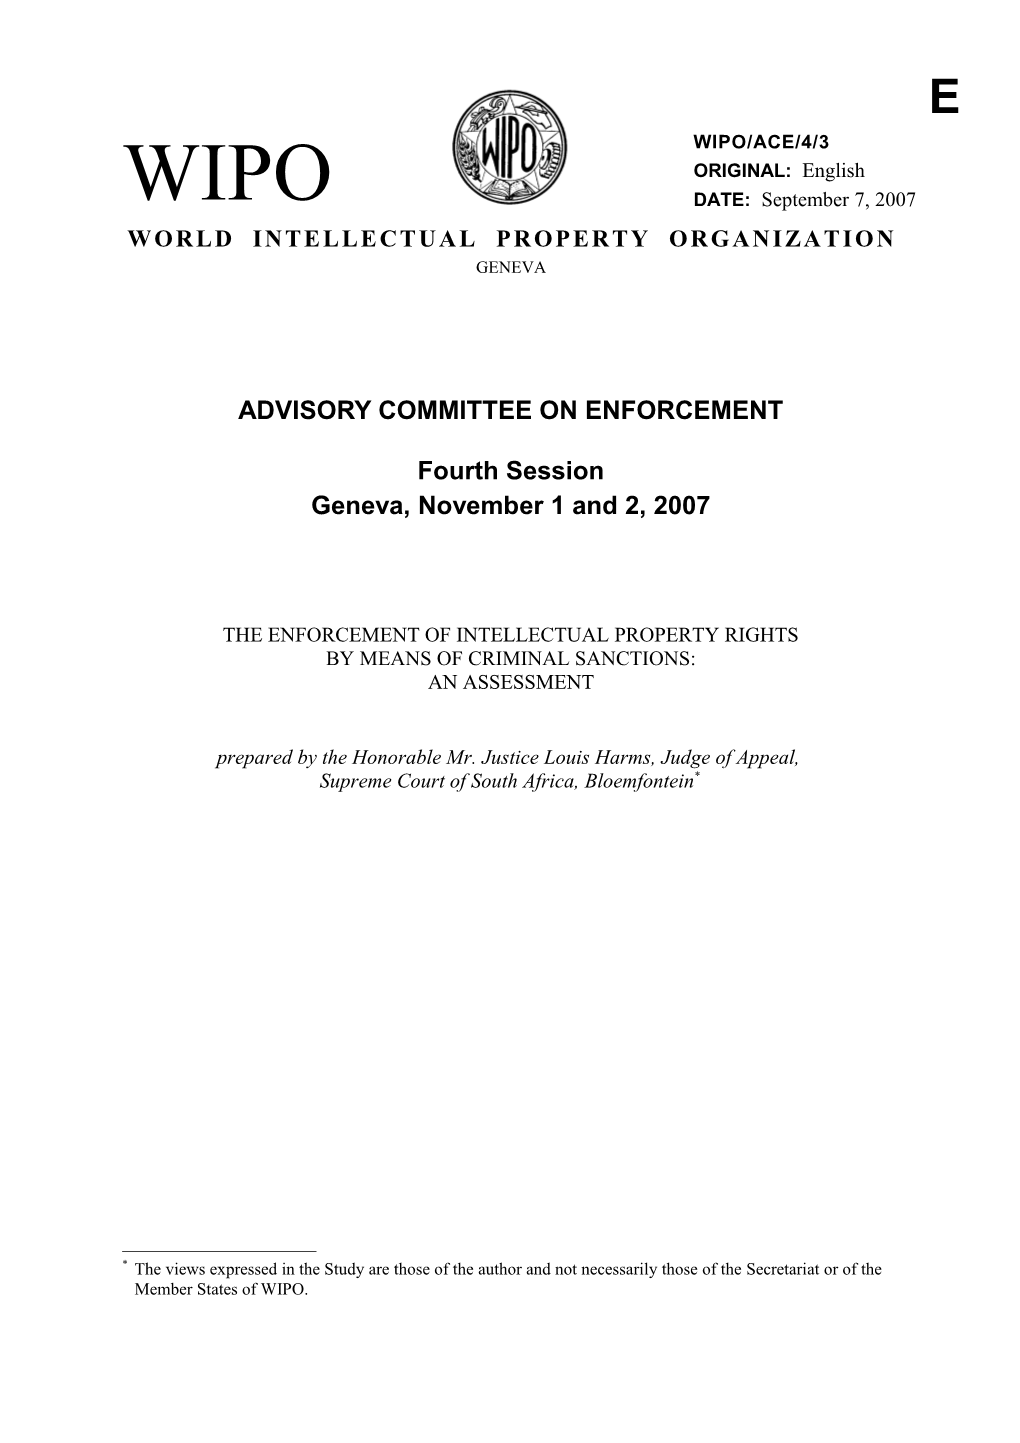 WIPO/ACE/4/3: the Enforcement of Intellectual Property Rights by Means of Criminal Sanctions